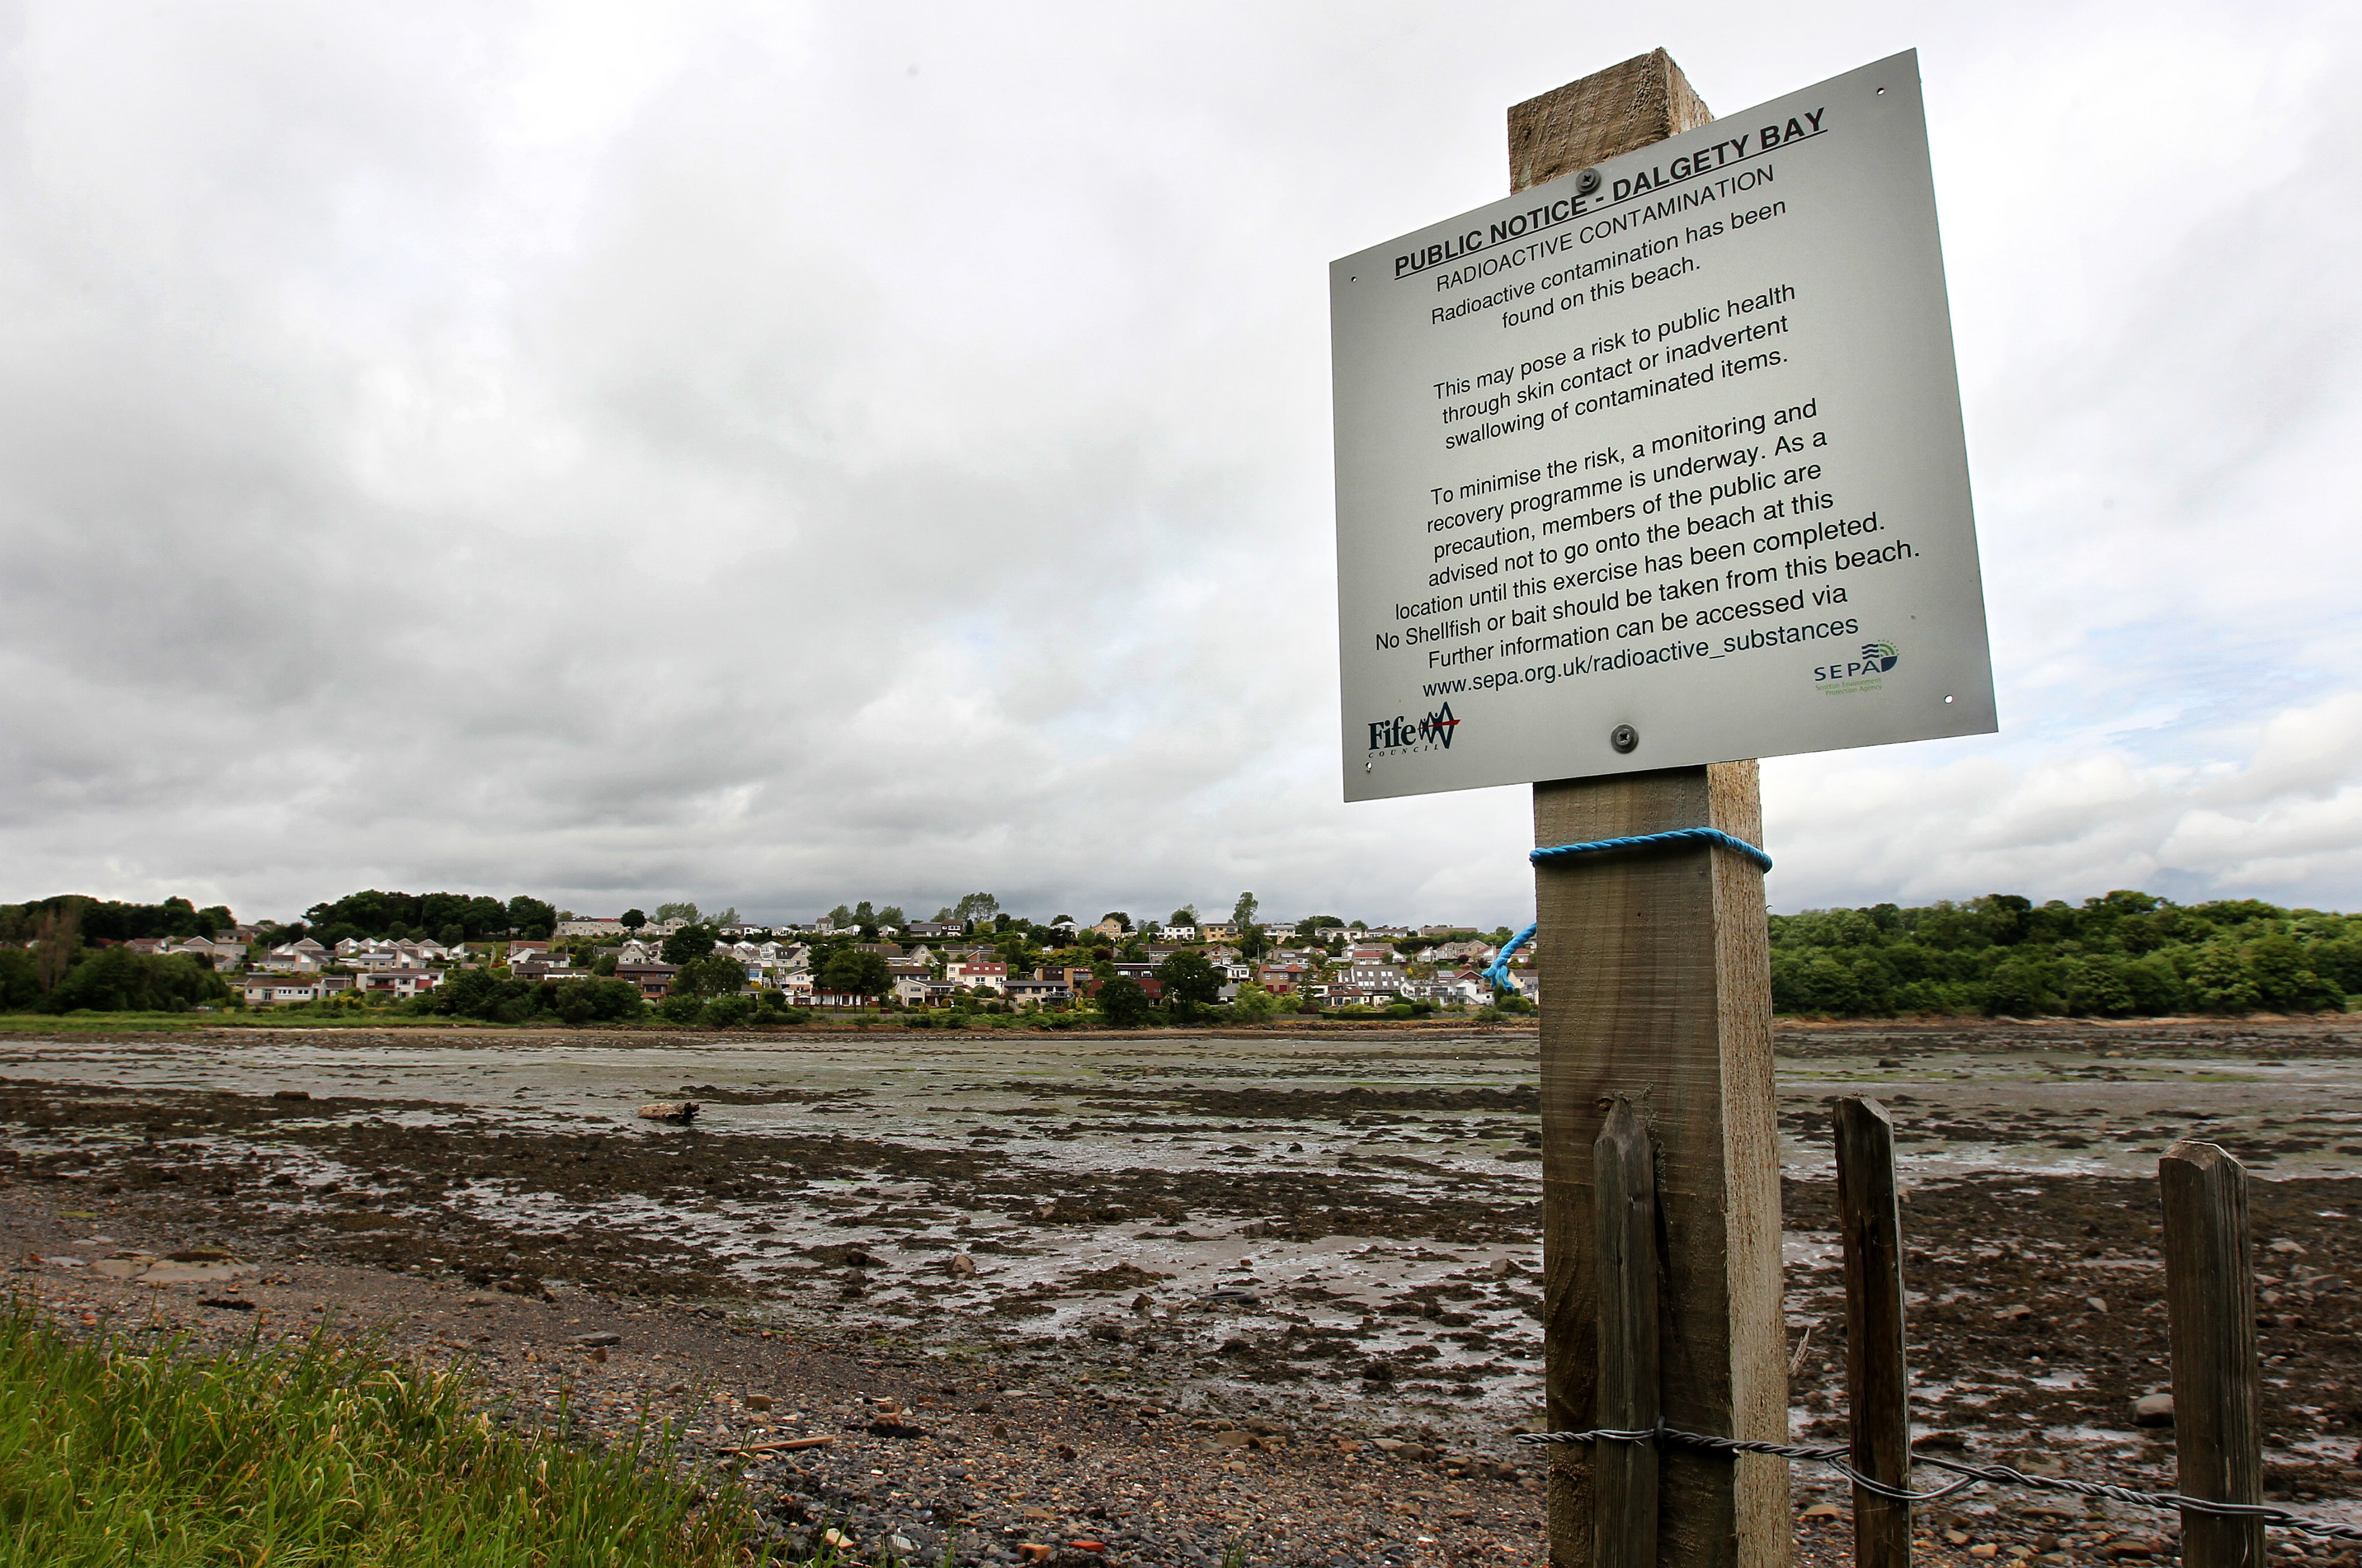 Signs were erected telling people to stay clear of affected parts of the shoreline.